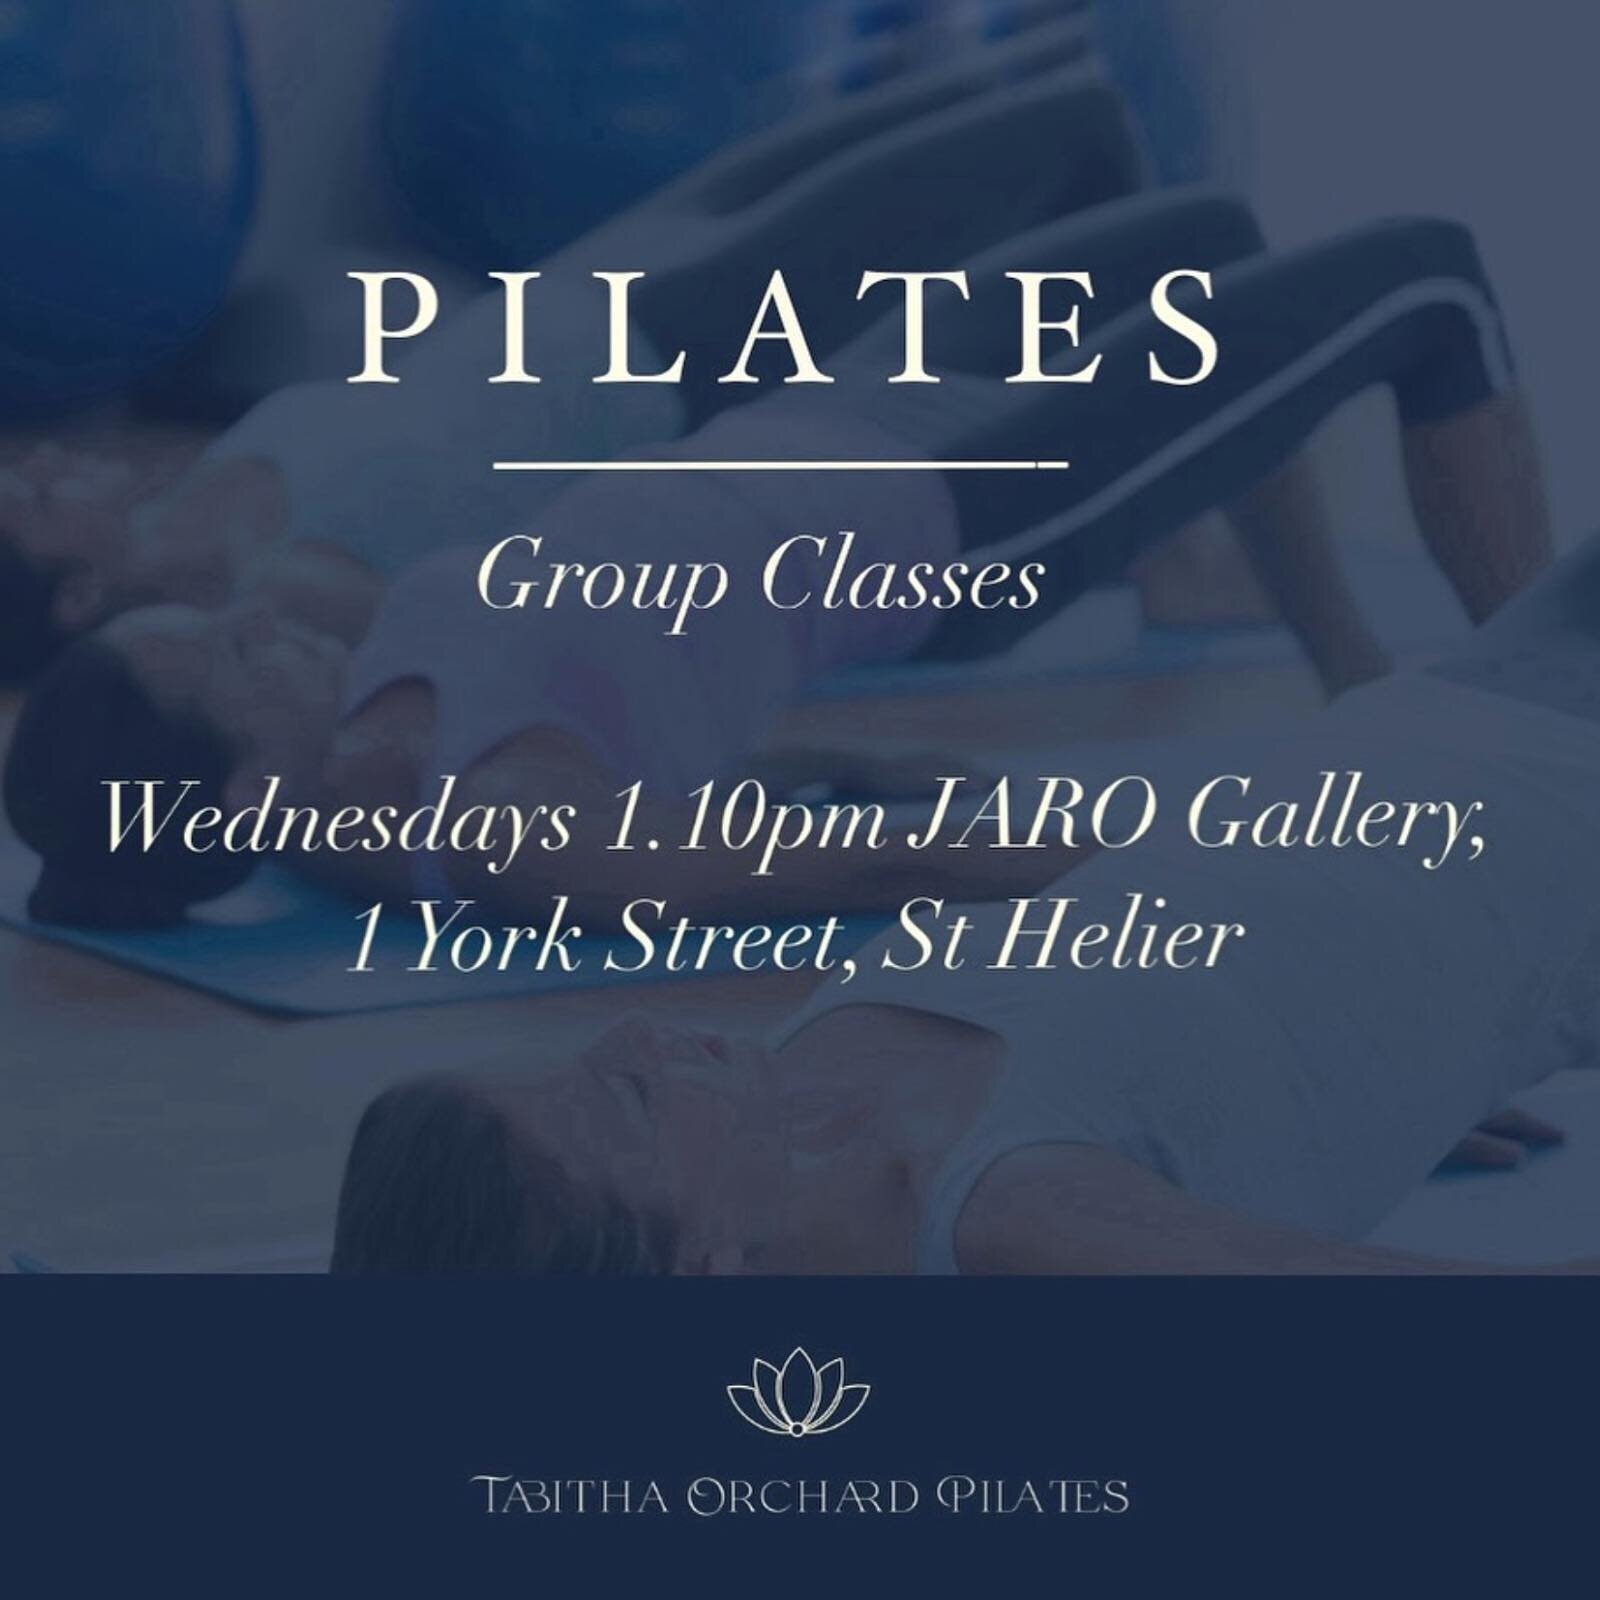 Join Wednesdays class in the gallery with the delightful @tabithaorchardpilates contact tabithaorchardpilates@gmail.com to book in. Enjoy getting fit at lunch time while surround by beautiful artworks. 

#jerseyci #channelislands #pilates